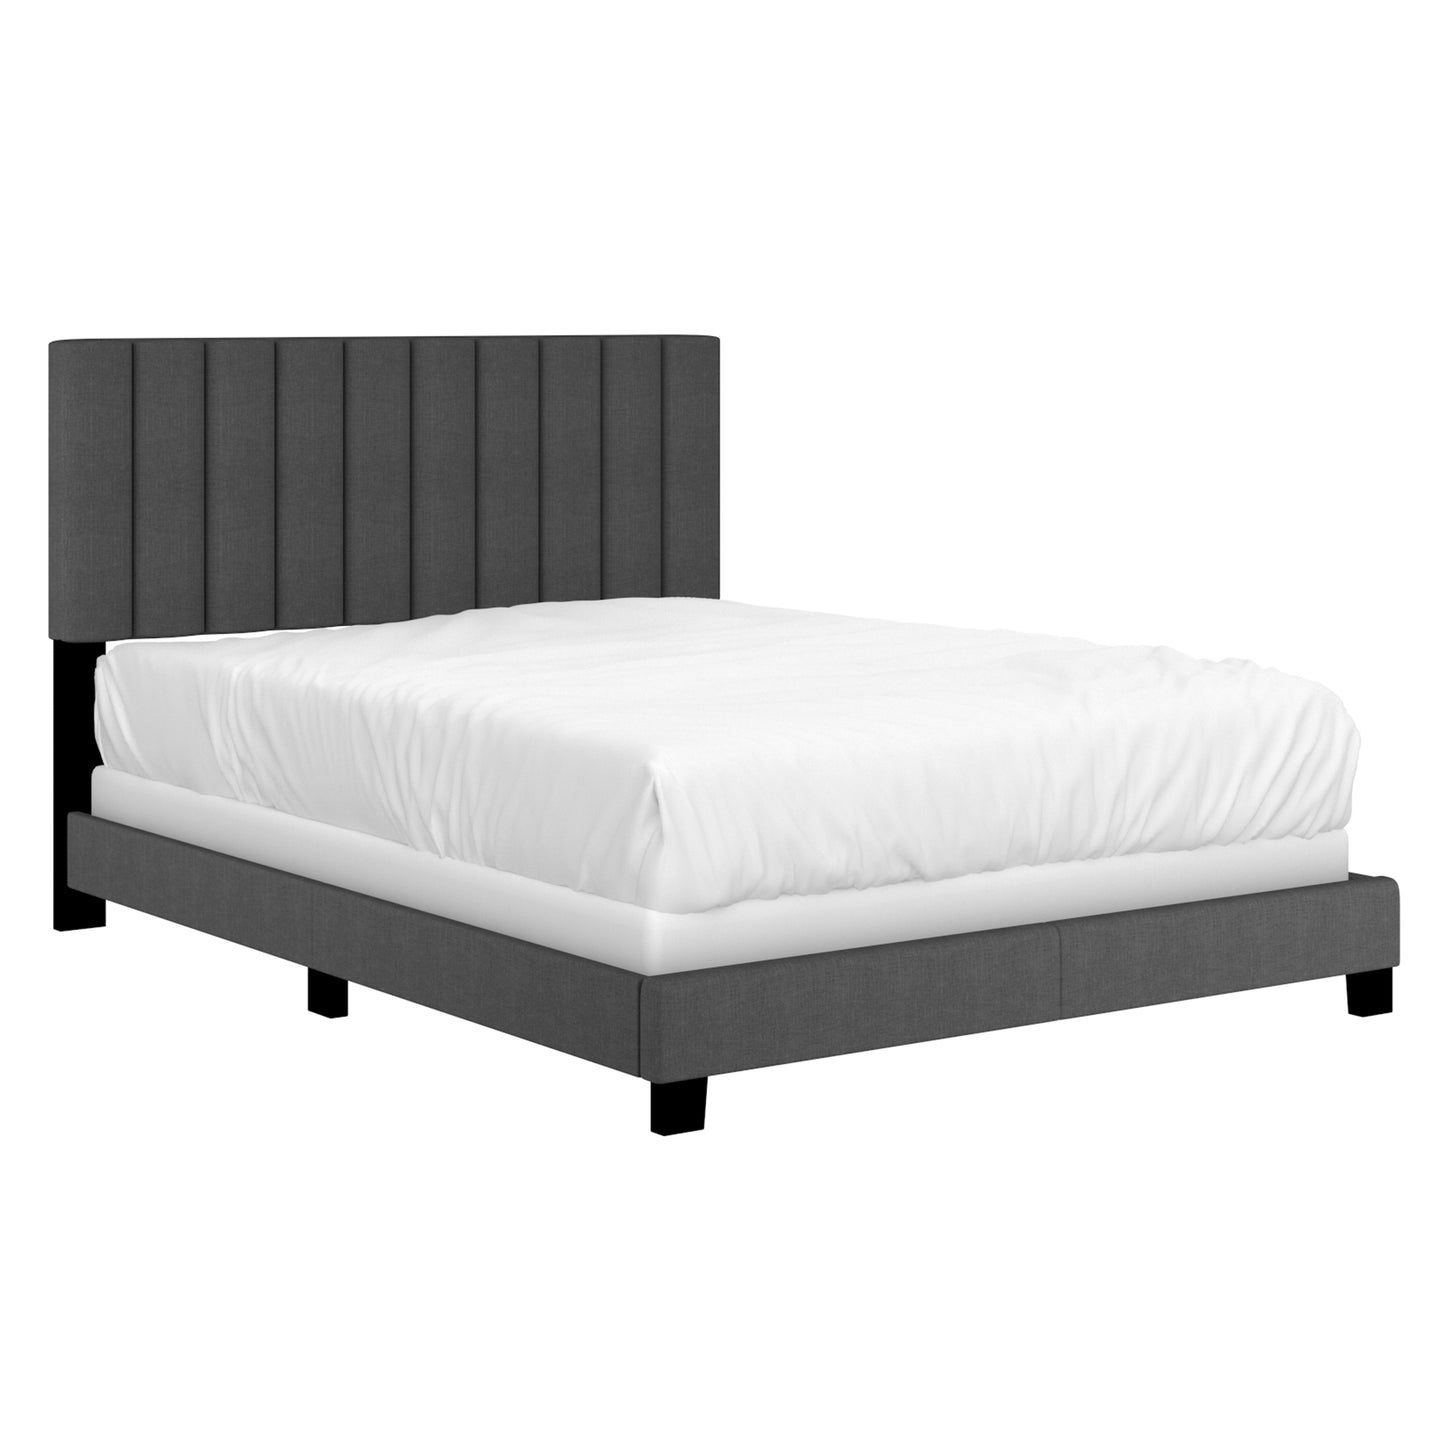 Jedd 60" Queen Bed in Charcoal